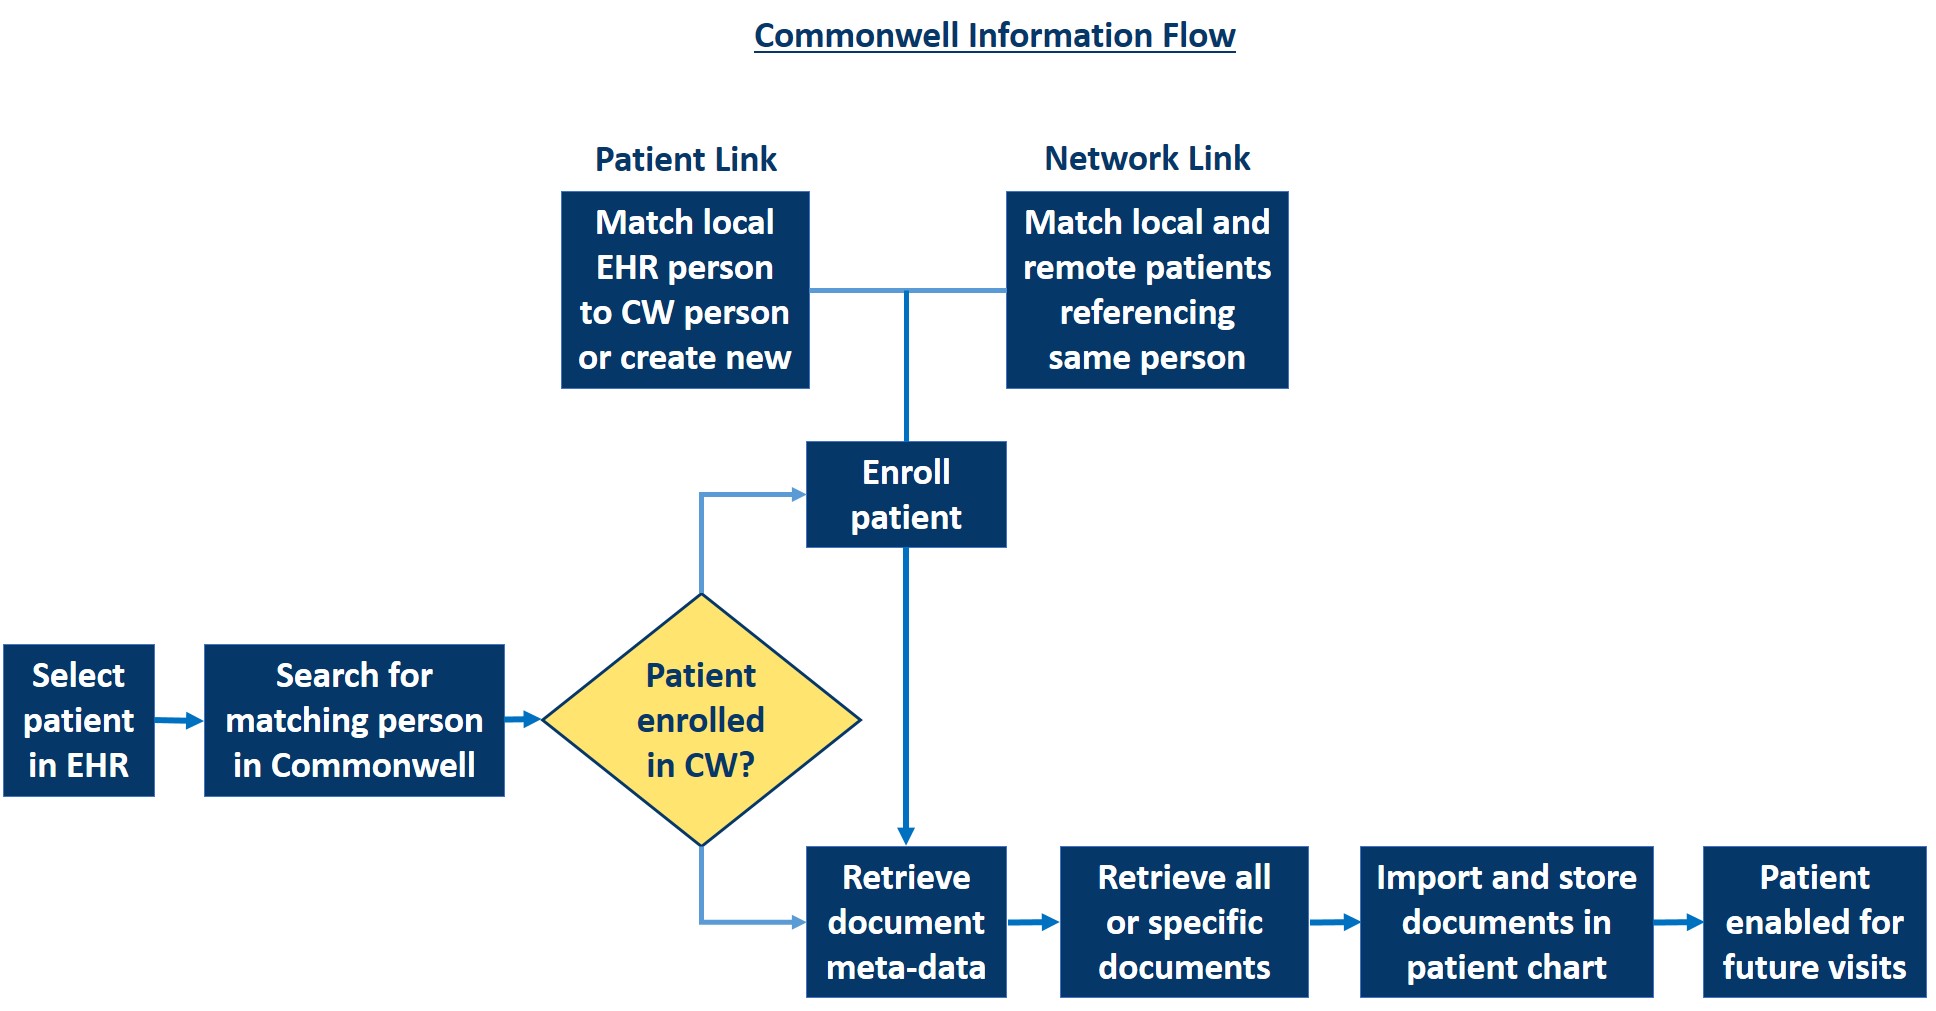 Commonwell Alliance information flow diagram